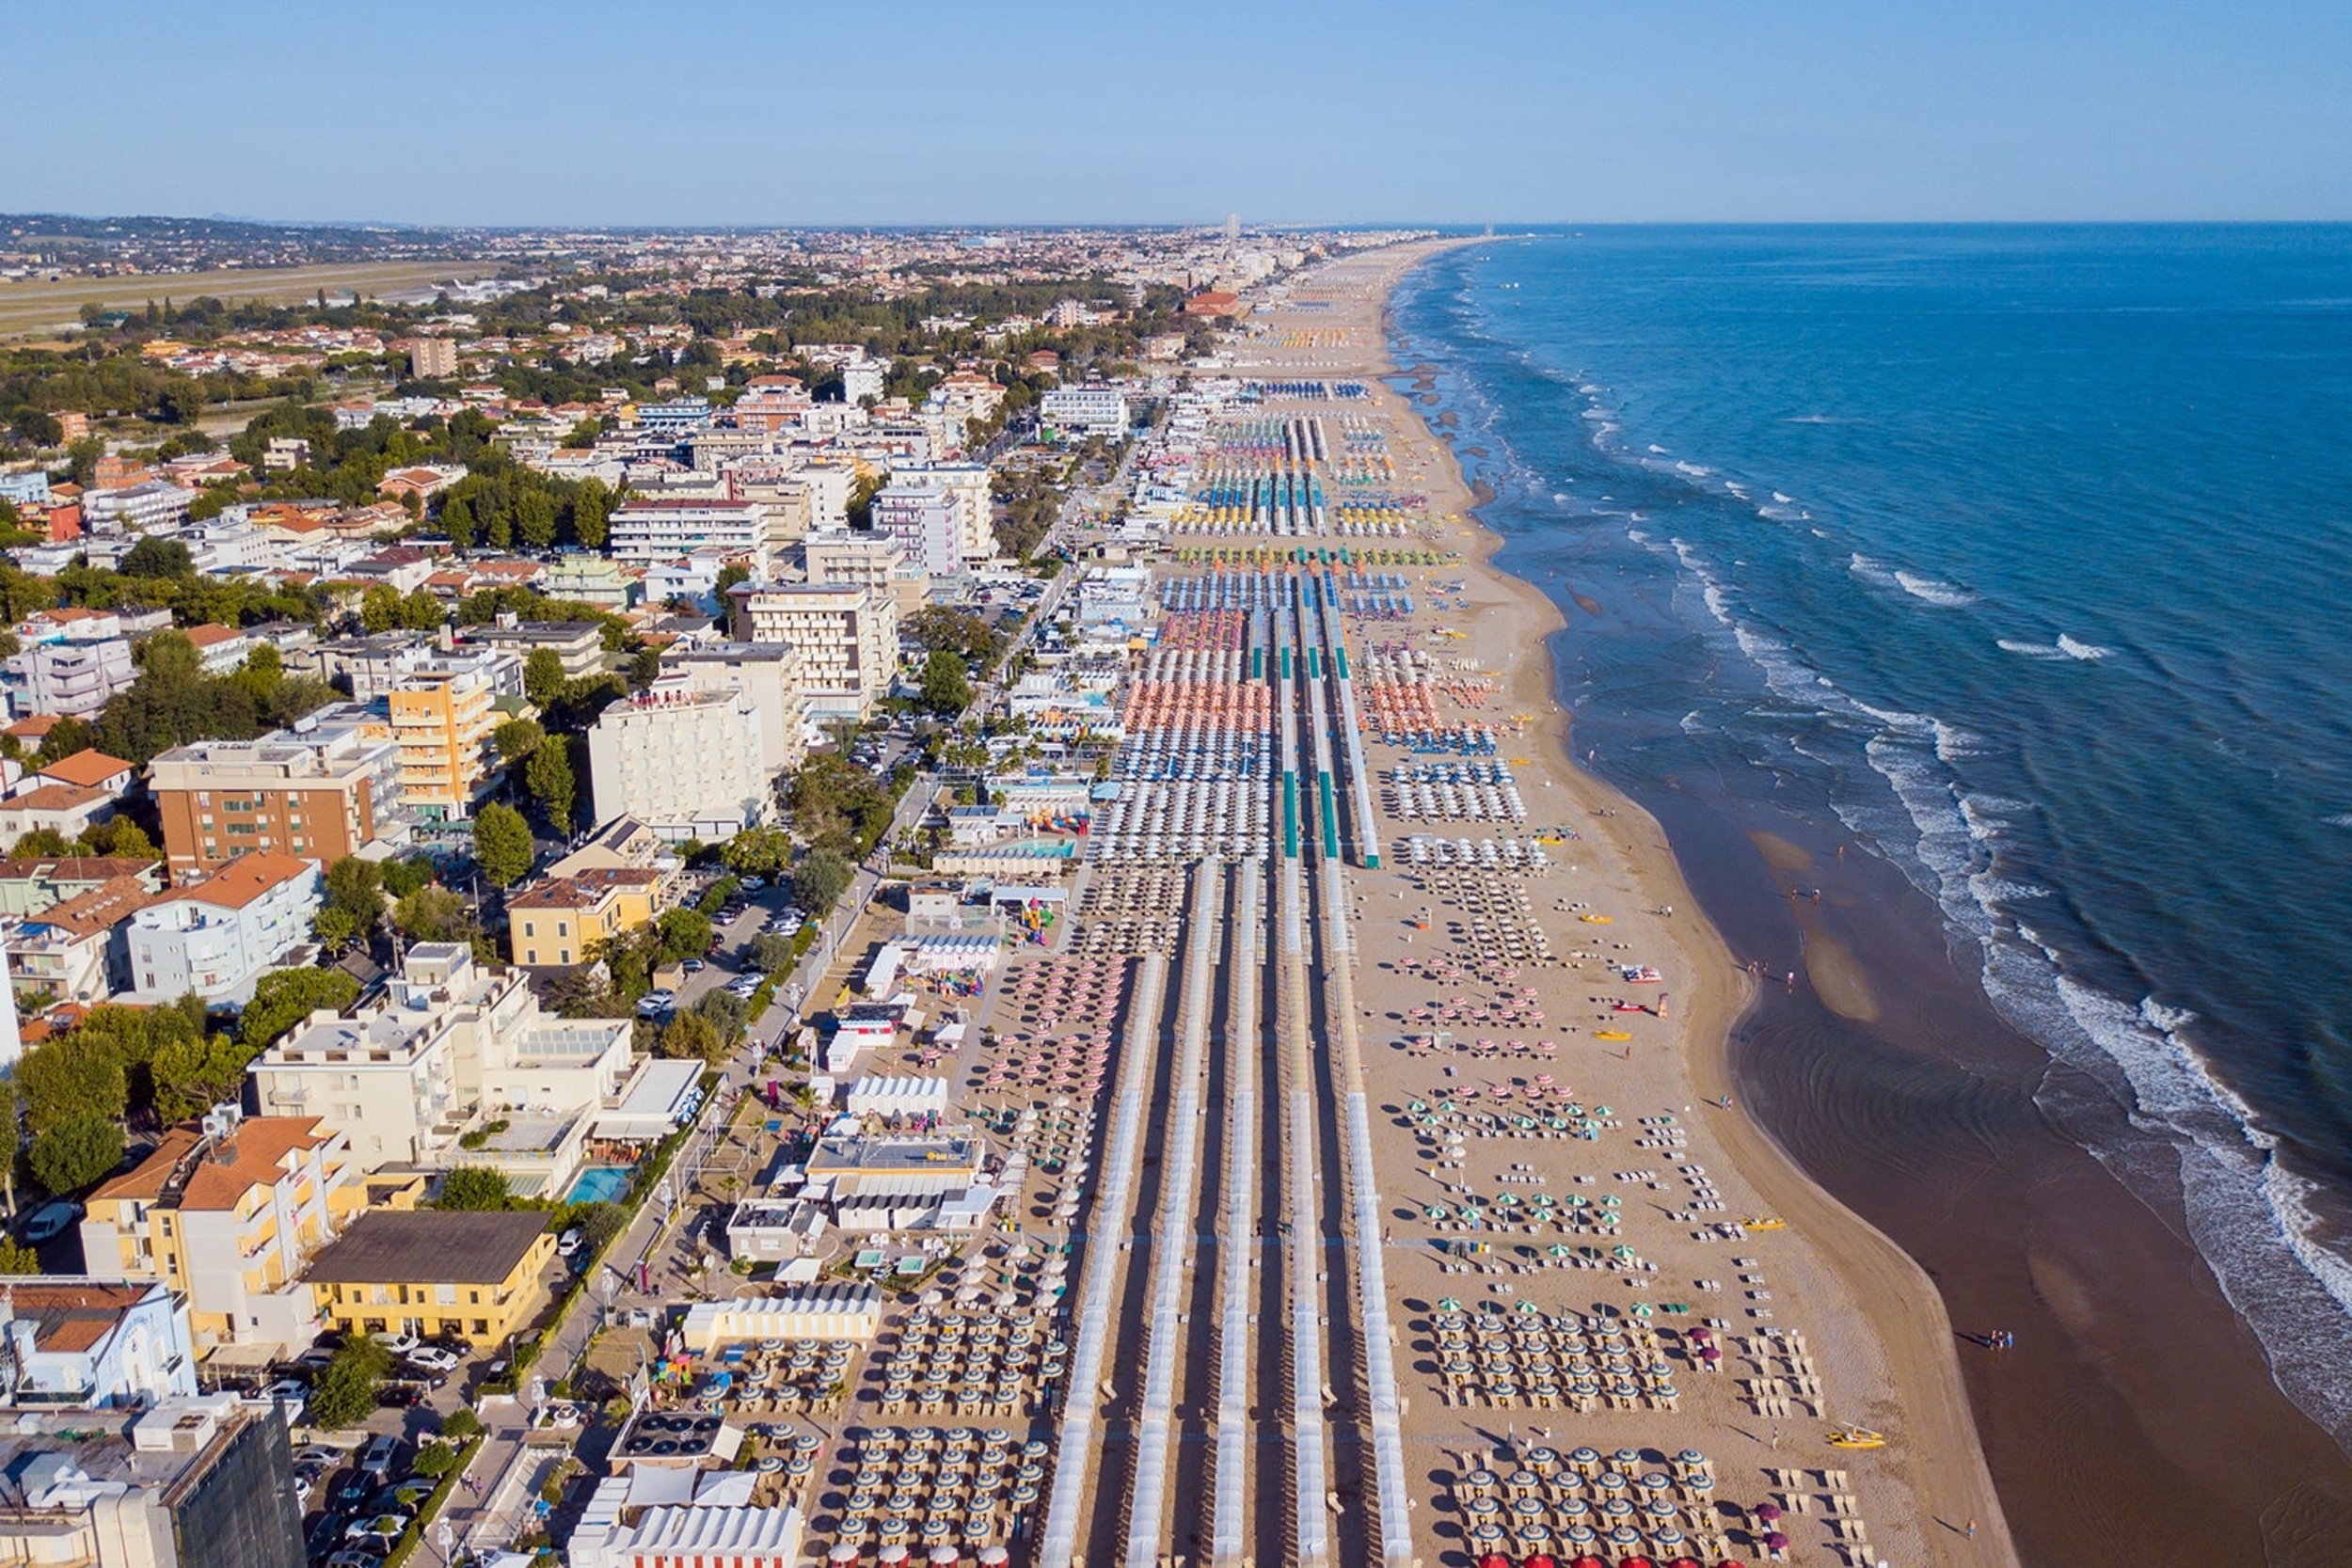 <p>Rimini is Federico Fellini's hometown, and you can see why. The long stretches of beach are packed with gorgeous women, bizarro characters, carnival rides, and splashes of color. This isn't the most picturesque town on our list, but it has the most personality. </p><p><a href='https://www.msn.com/en-us/community/channel/vid-cj9pqbr0vn9in2b6ddcd8sfgpfq6x6utp44fssrv6mc2gtybw0us'>Did you enjoy this slideshow? Follow us on MSN to see more of our exclusive lifestyle content.</a></p>